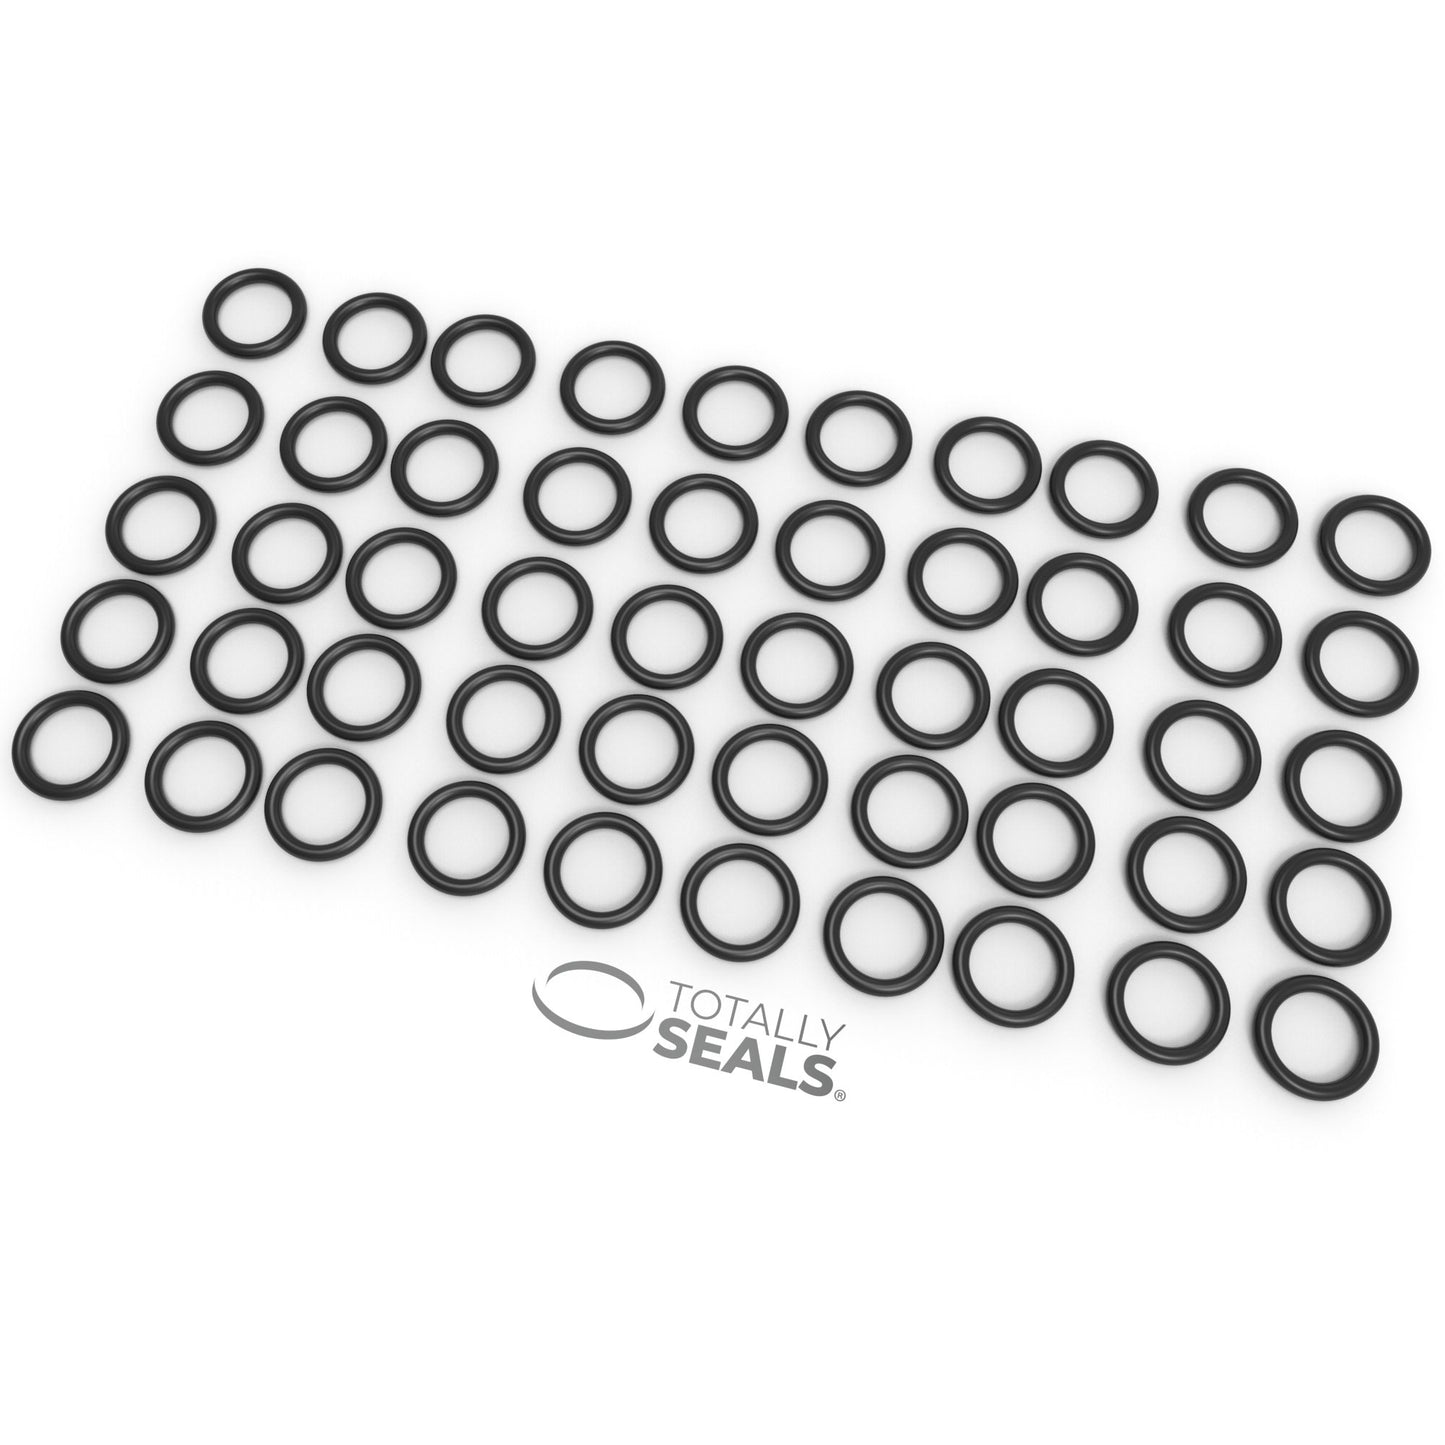 37mm x 3mm (43mm OD) Nitrile O-Rings - Totally Seals®